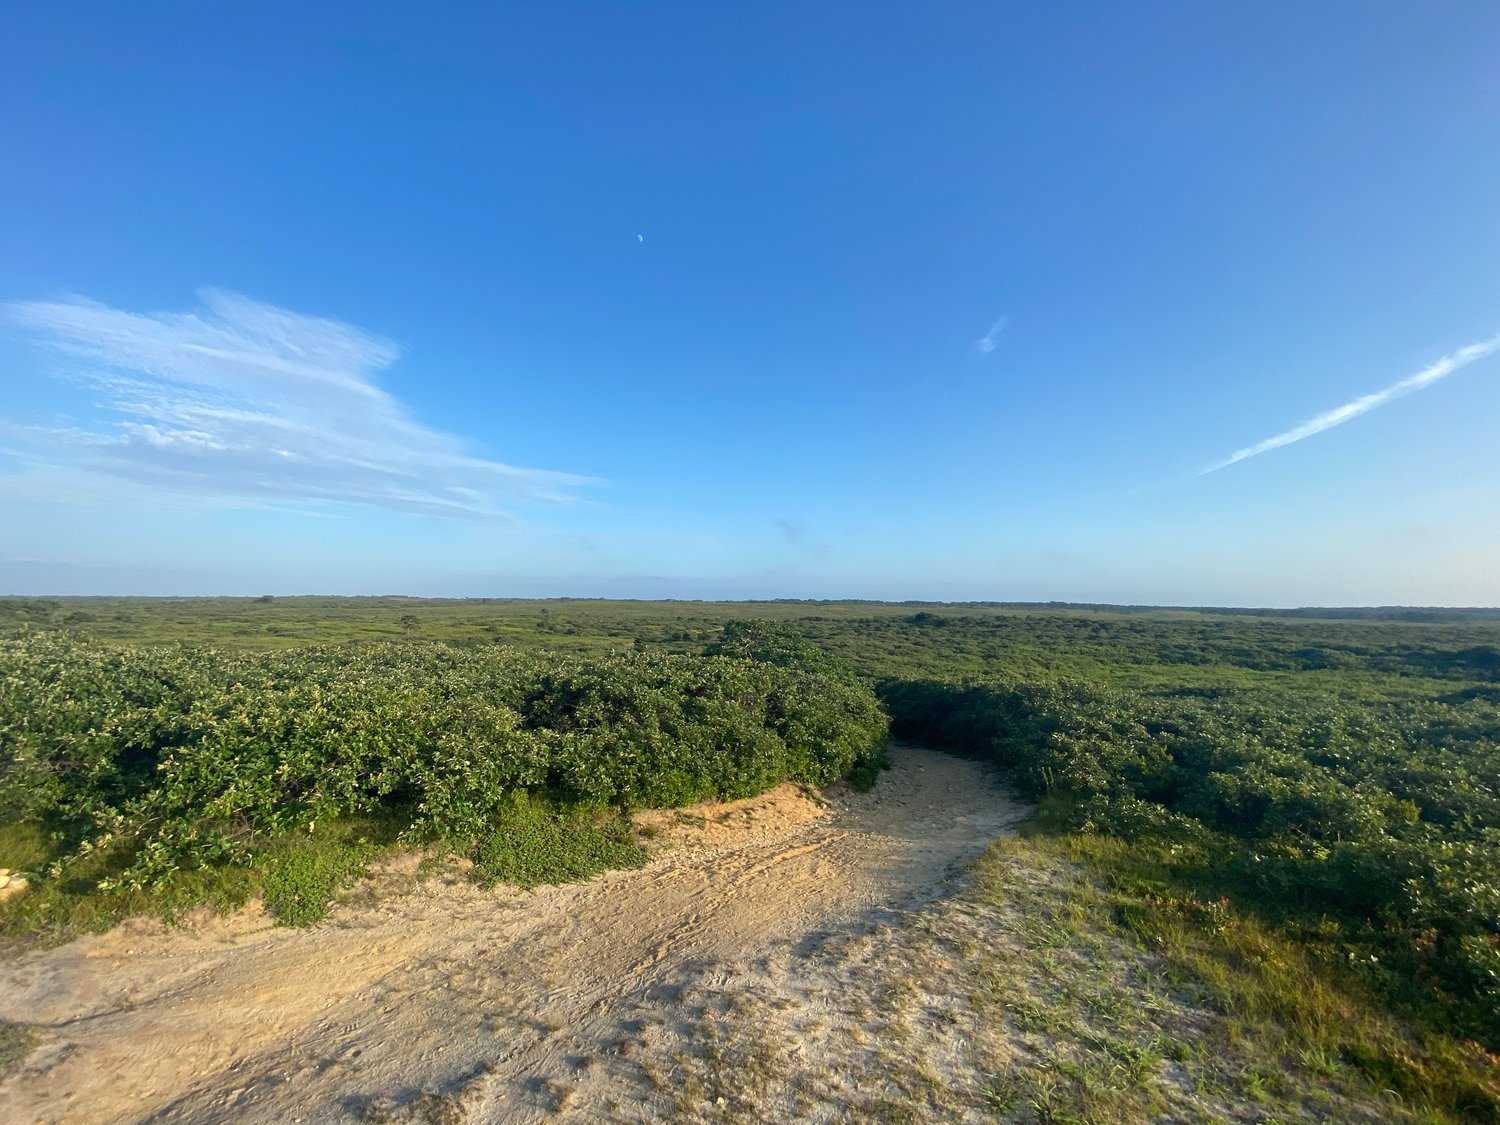 The Nantucket Conservation Foundation’s Serengeti property as seen from the southern end of the island’s terminal moraine in the Middle Moors.